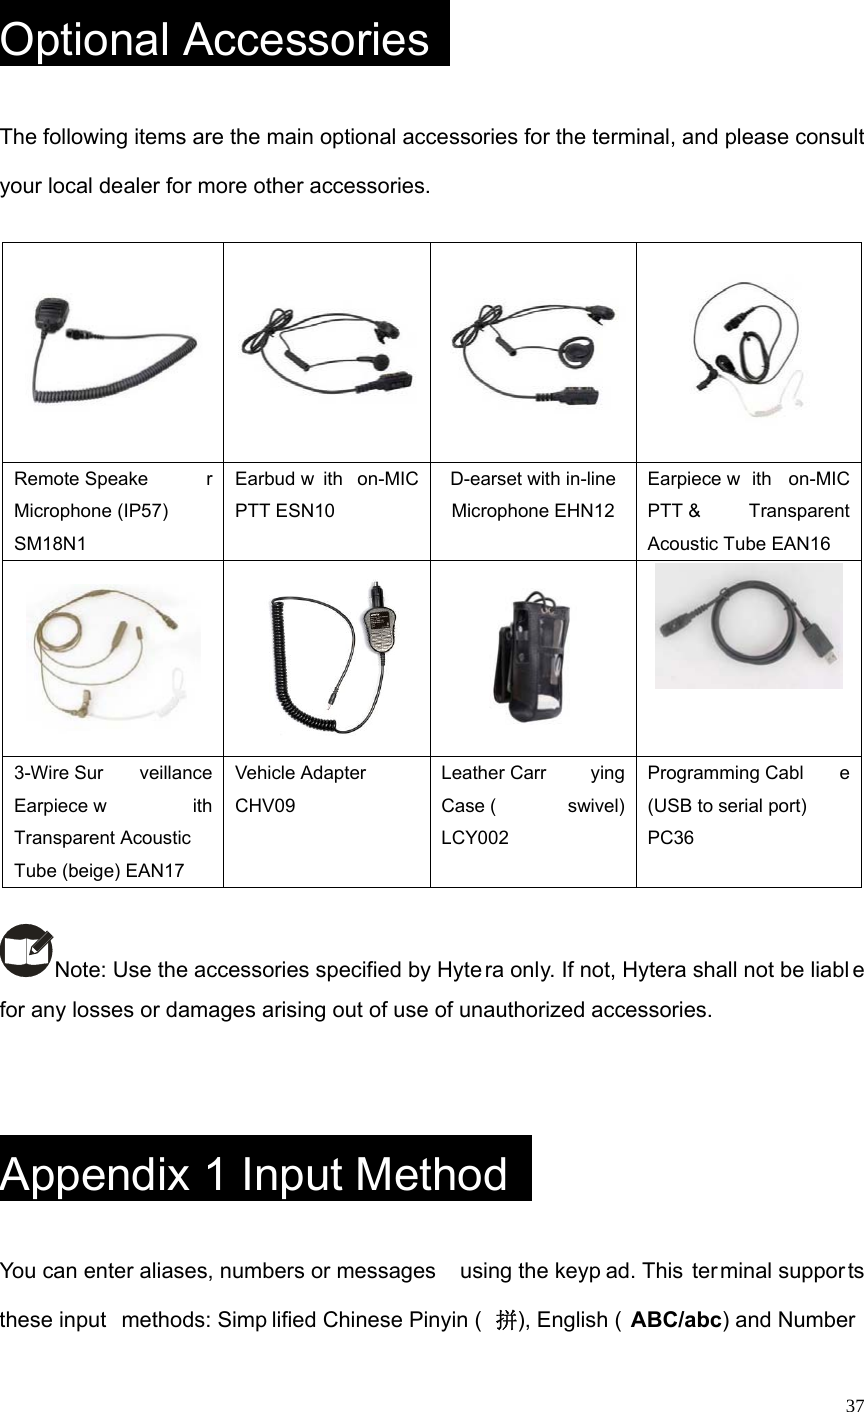   37 Optional Accessories   The following items are the main optional accessories for the terminal, and please consult your local dealer for more other accessories.      Remote Speake r Microphone (IP57) SM18N1   Earbud w ith on-MIC PTT ESN10 D-earset with in-line Microphone EHN12 Earpiece w ith on-MIC PTT &amp;  Transparent Acoustic Tube EAN16       3-Wire Sur veillance Earpiece w ith Transparent Acoustic  Tube (beige) EAN17 Vehicle Adapter  CHV09   Leather Carr ying Case ( swivel) LCY002 Programming Cabl e (USB to serial port)  PC36  Note: Use the accessories specified by Hyte ra only. If not, Hytera shall not be liabl e for any losses or damages arising out of use of unauthorized accessories.   Appendix 1 Input Method   You can enter aliases, numbers or messages  using the keyp ad. This  ter minal suppor ts these input  methods: Simp lified Chinese Pinyin ( 拼), English ( ABC/abc) and Number  